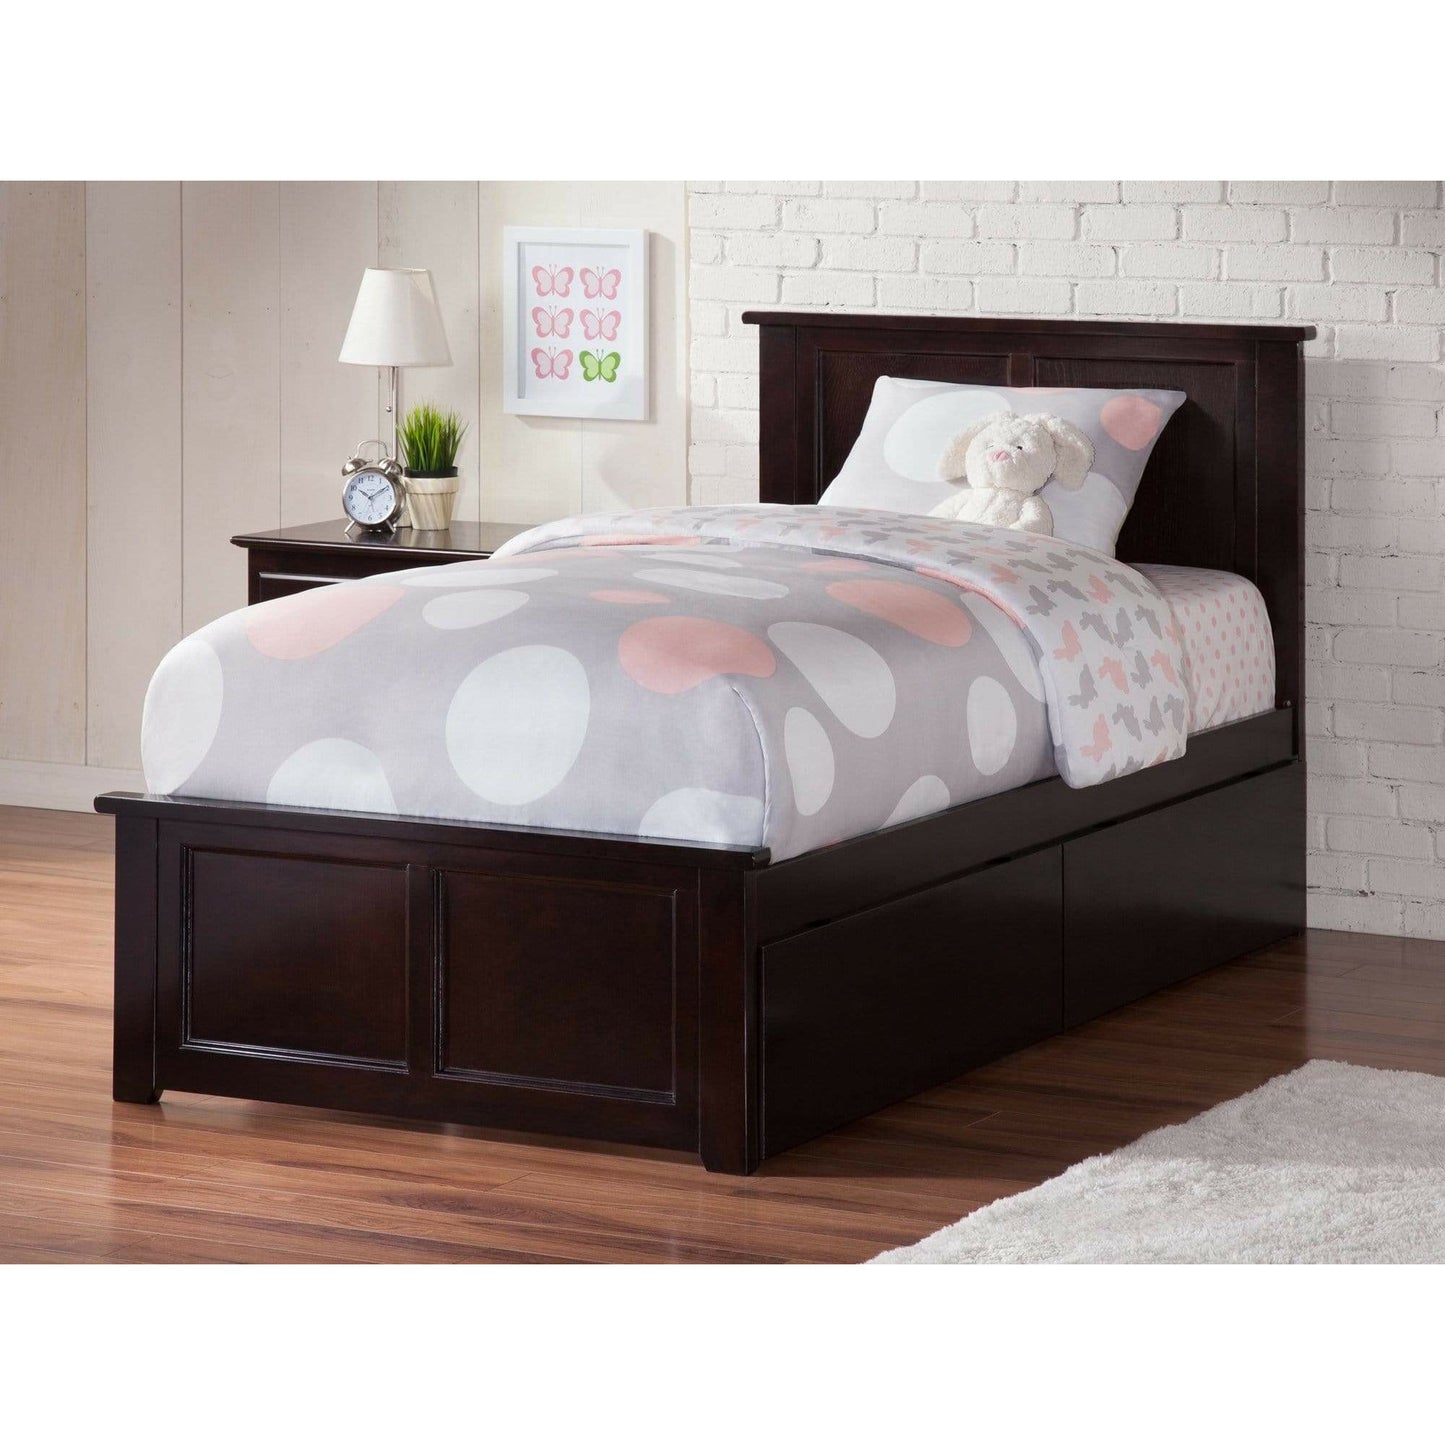 Atlantic Furniture Bed Madison Twin XL Platform Bed with Matching Foot Board with 2 Urban Bed Drawers in Espresso